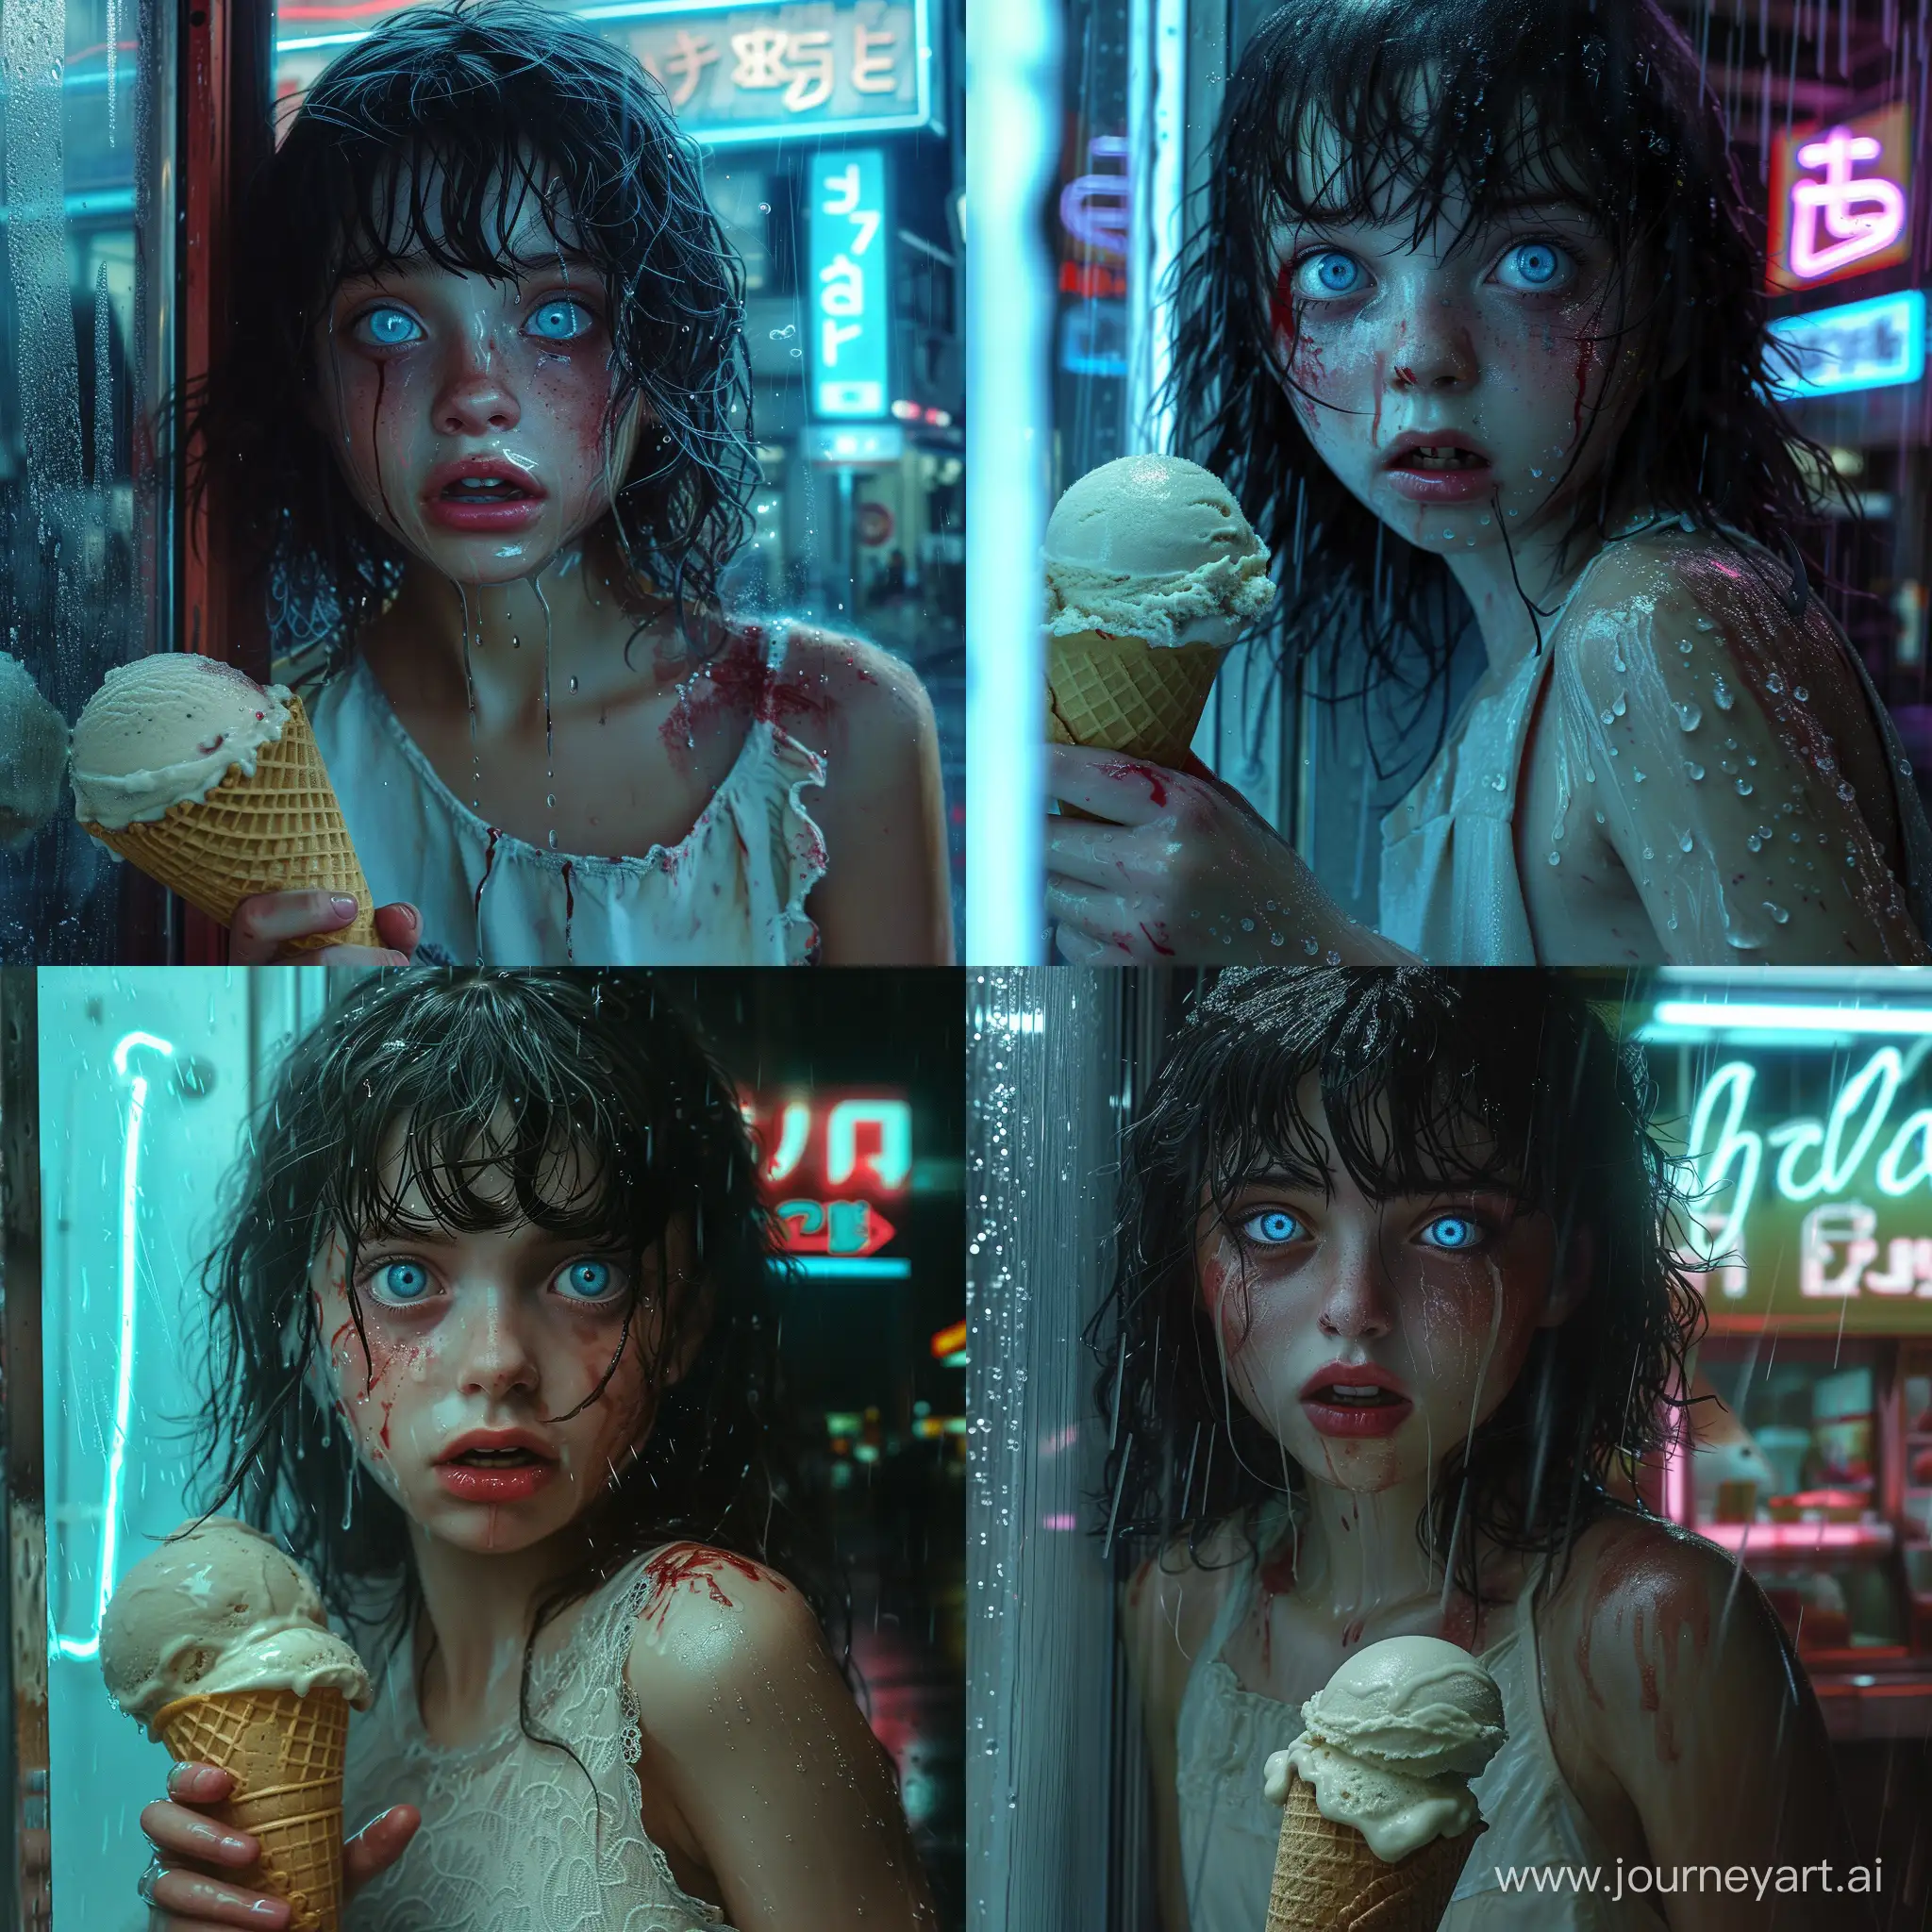 Distressed-Girl-with-Fallen-Ice-Cream-in-Mysterious-Night-Scene